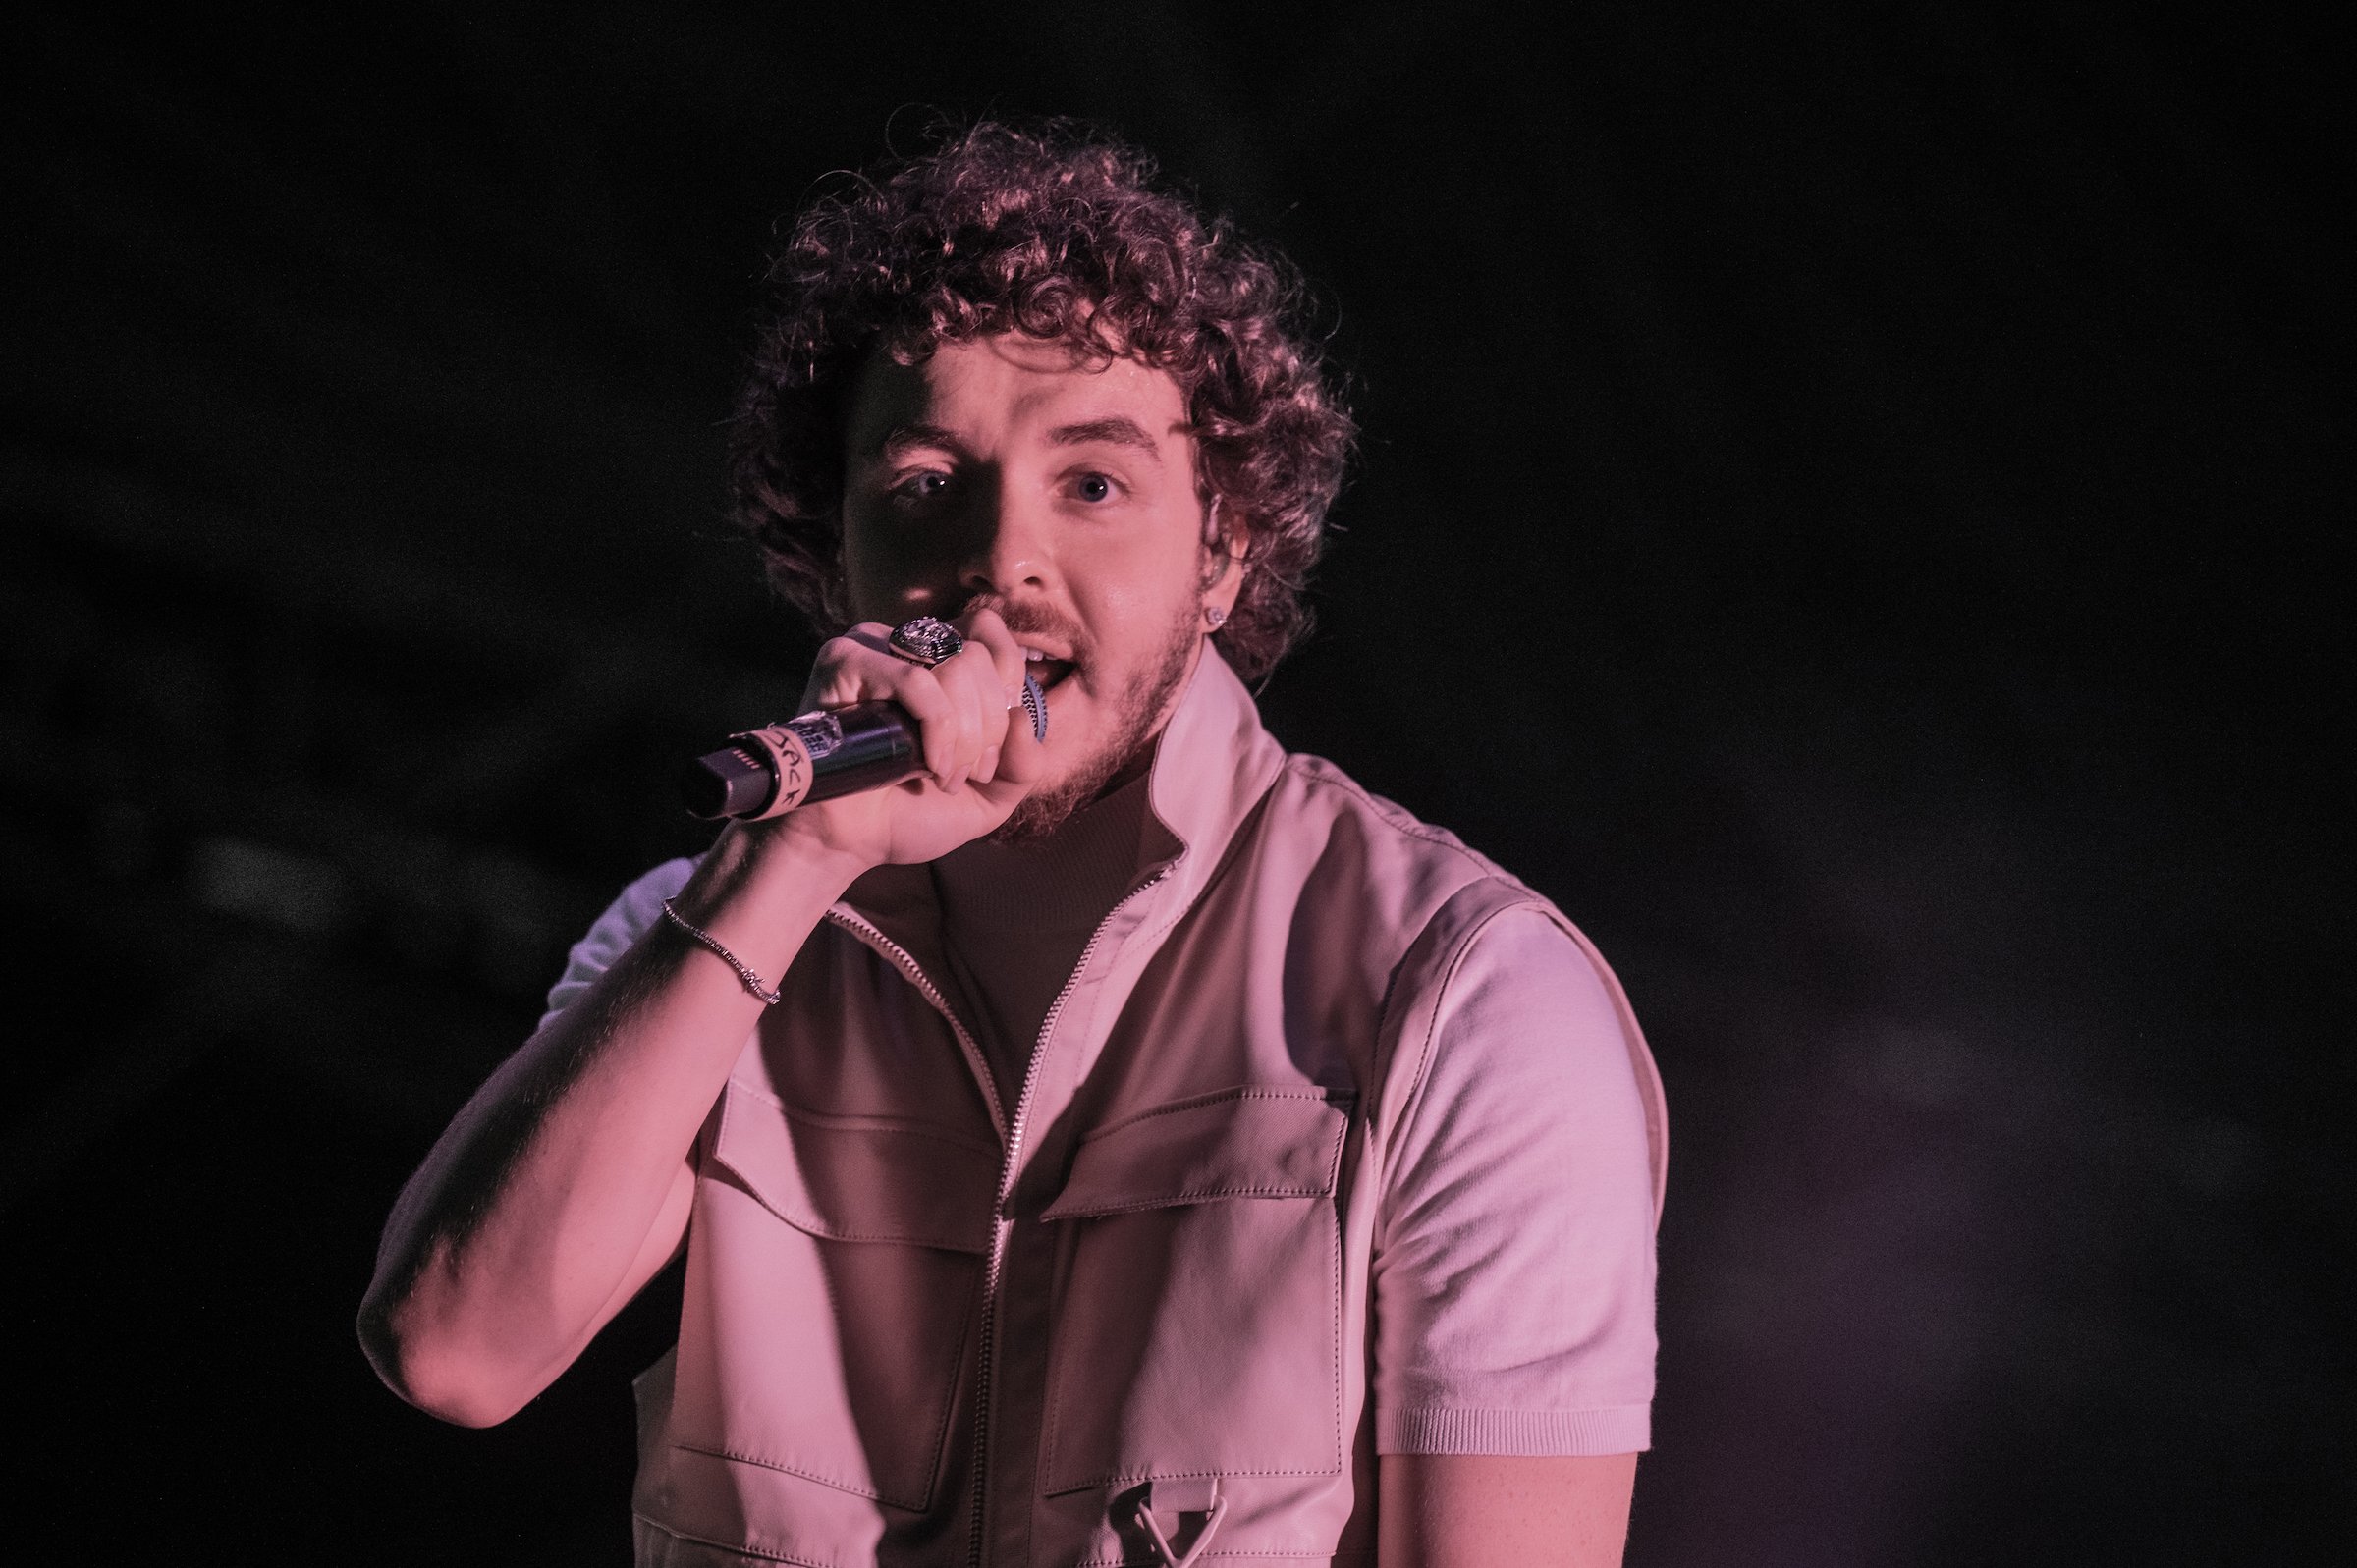 Rapper Jack Harlow performs on stage during weekend two of the Austin City Limits Festival at Zilker Park